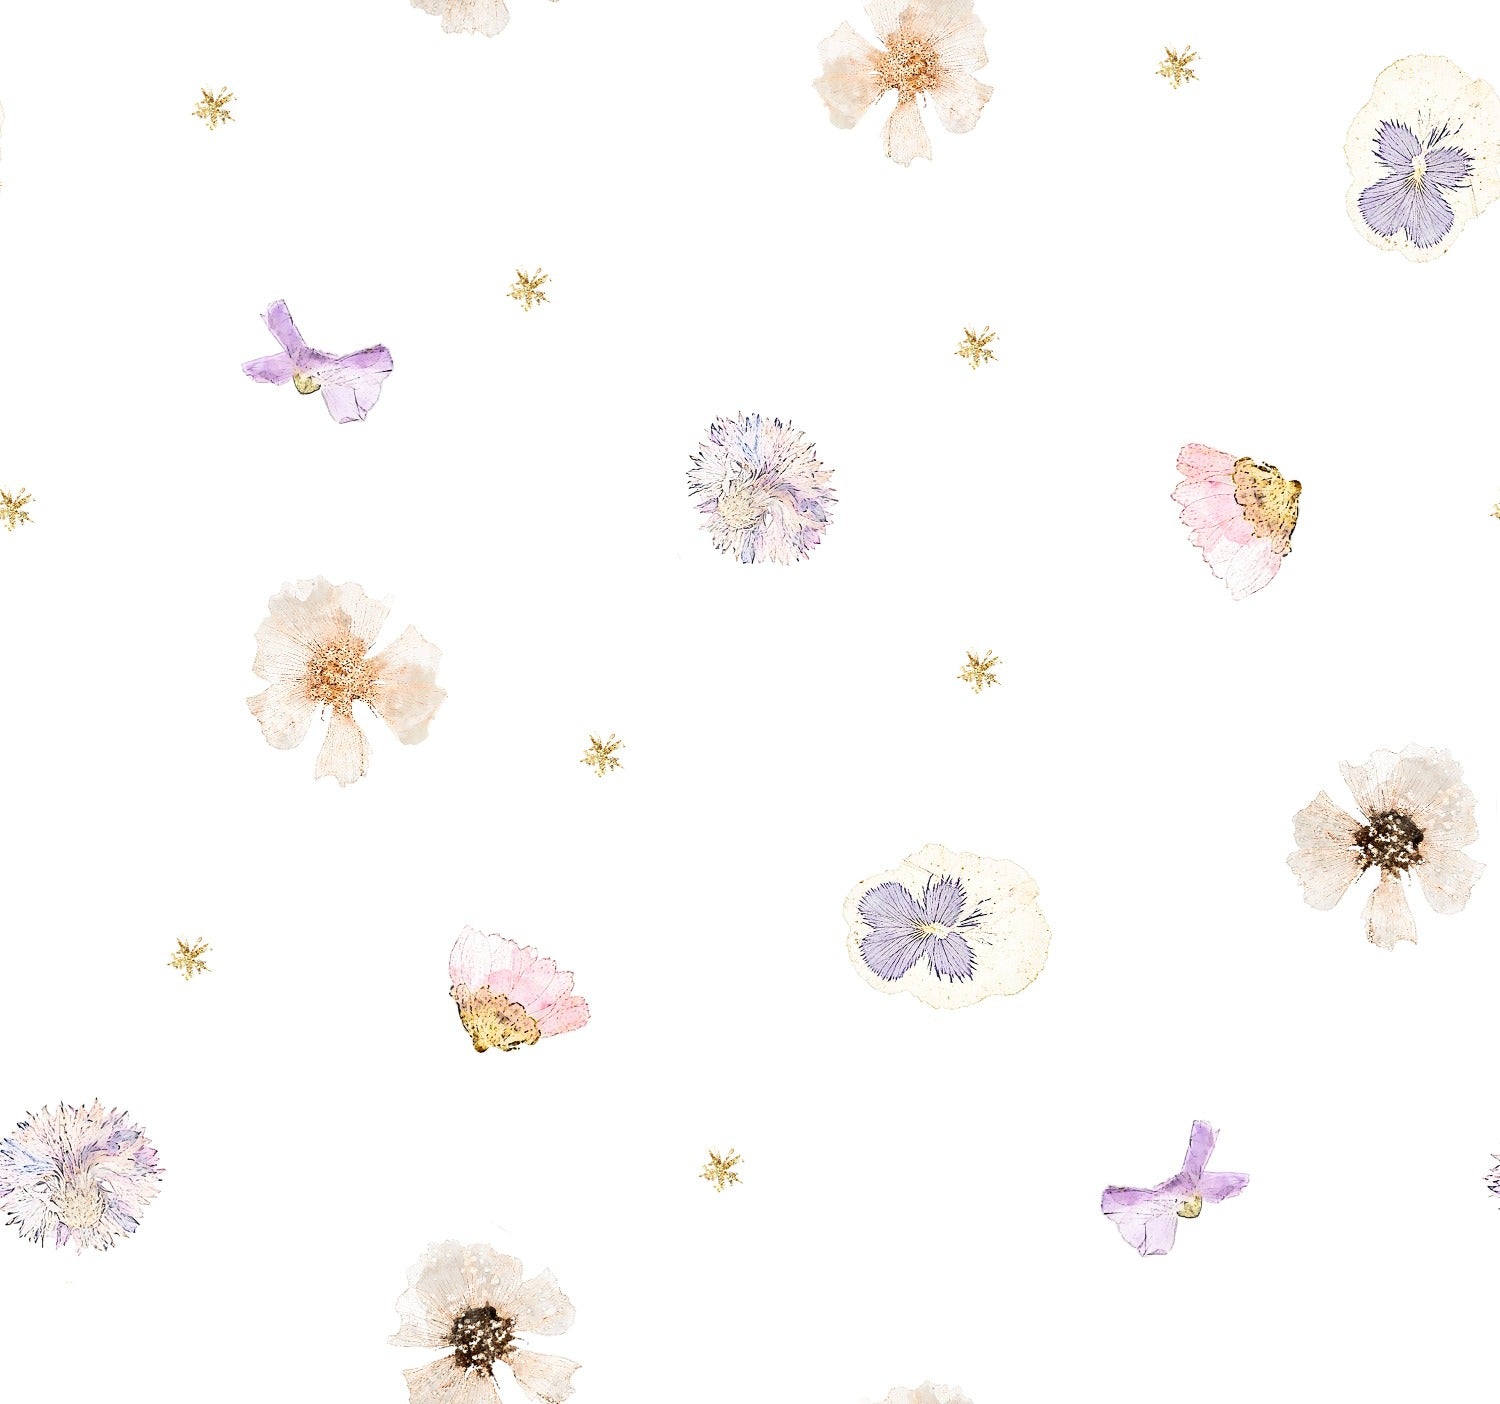 Detailed pattern of Pressed Flowers II Wallpaper featuring various pastel-colored flowers and small golden stars on a white background.